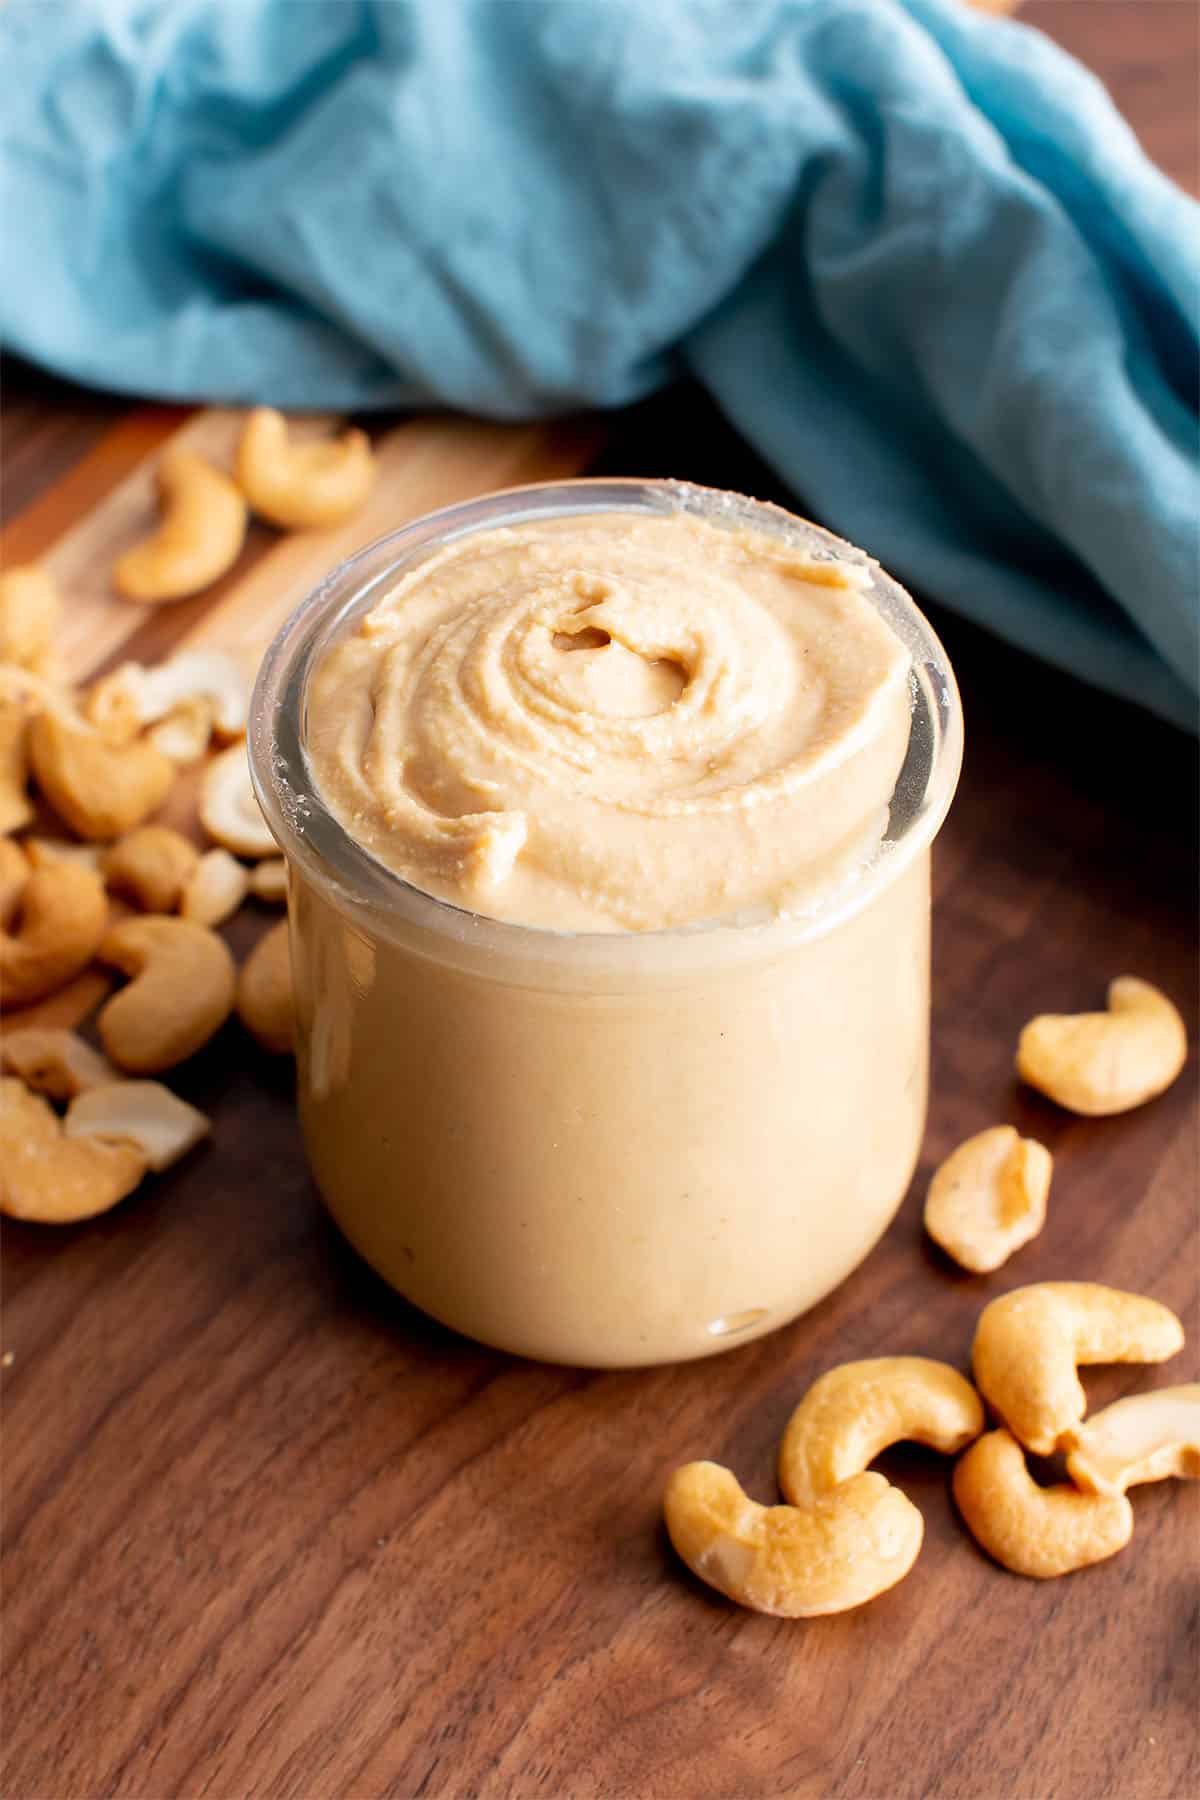 Cashew butter in a jar with cashews on a wooden table